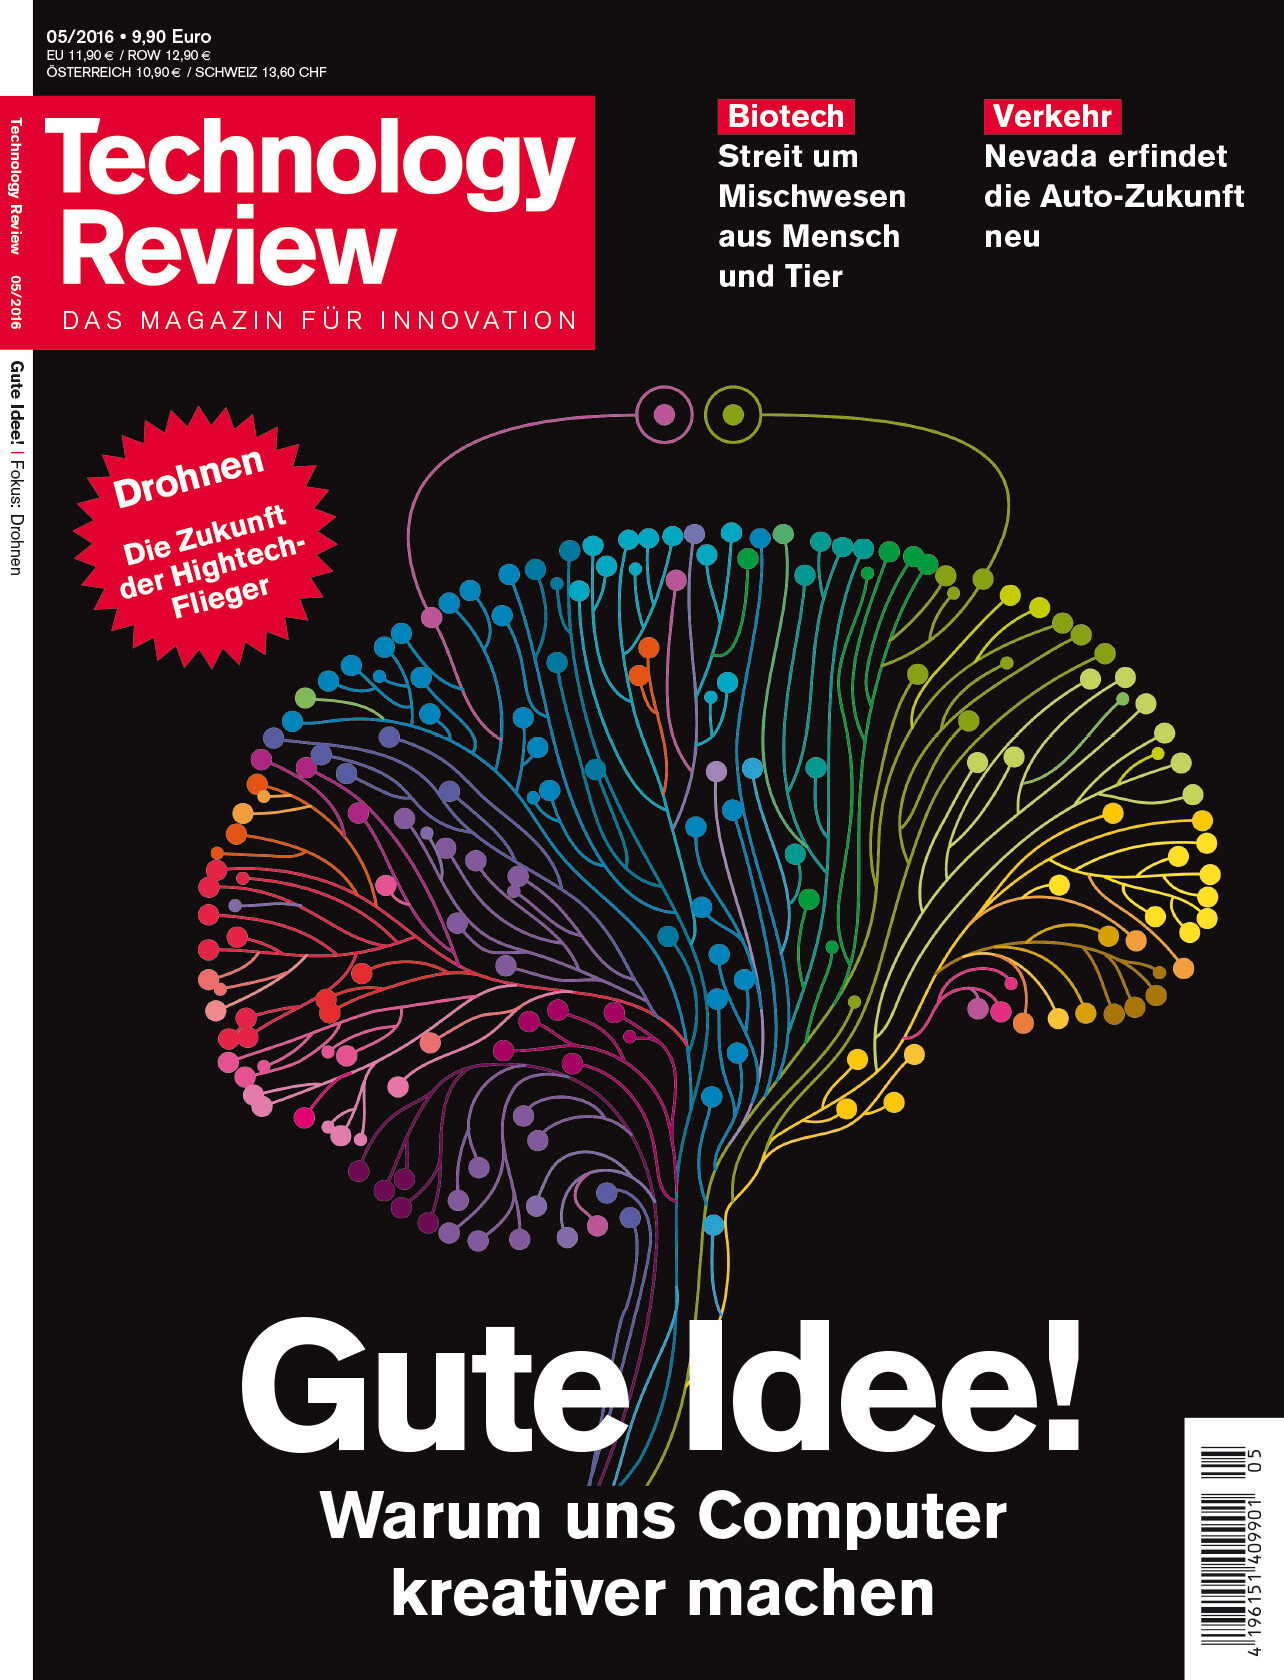 Technology Review 05/2016